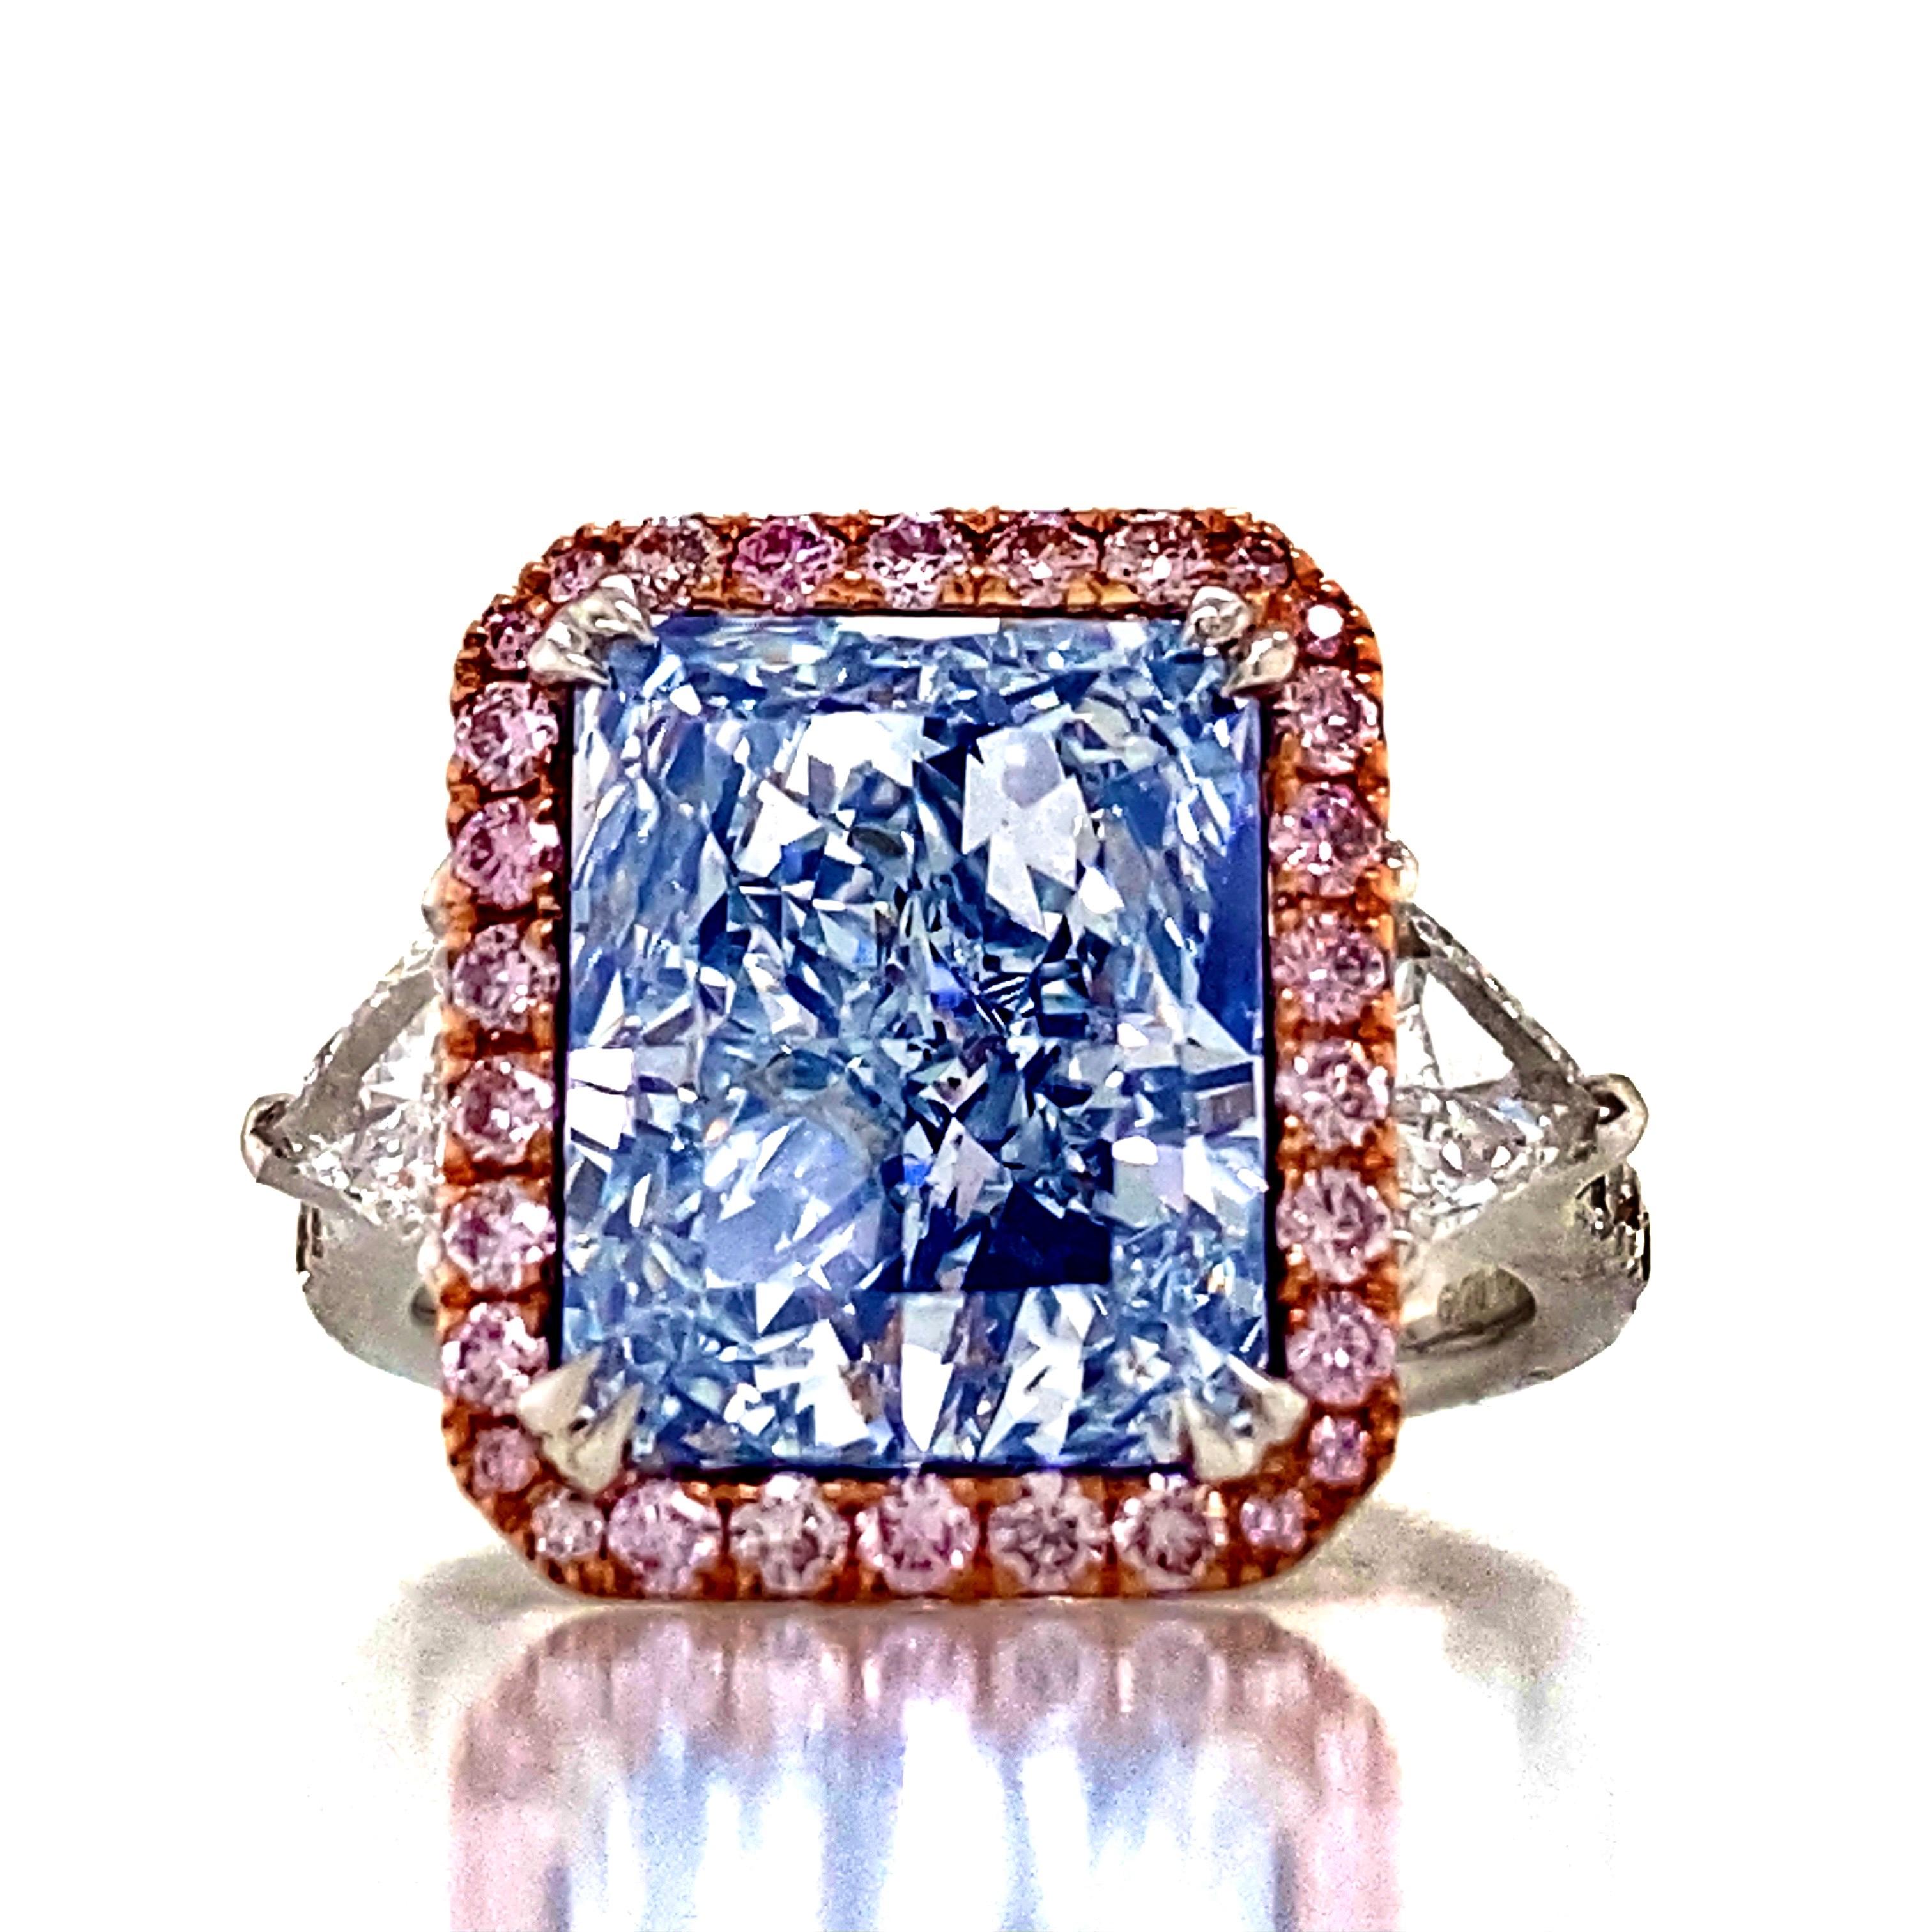 From the Emilio Jewelry Museum Vault, Showcasing a magnificent radiant cut natural Gia certified one of a kind pure light blue diamond with no overtone.  The cutting of the diamond is exceptional, and the shape is very desirable as its a long